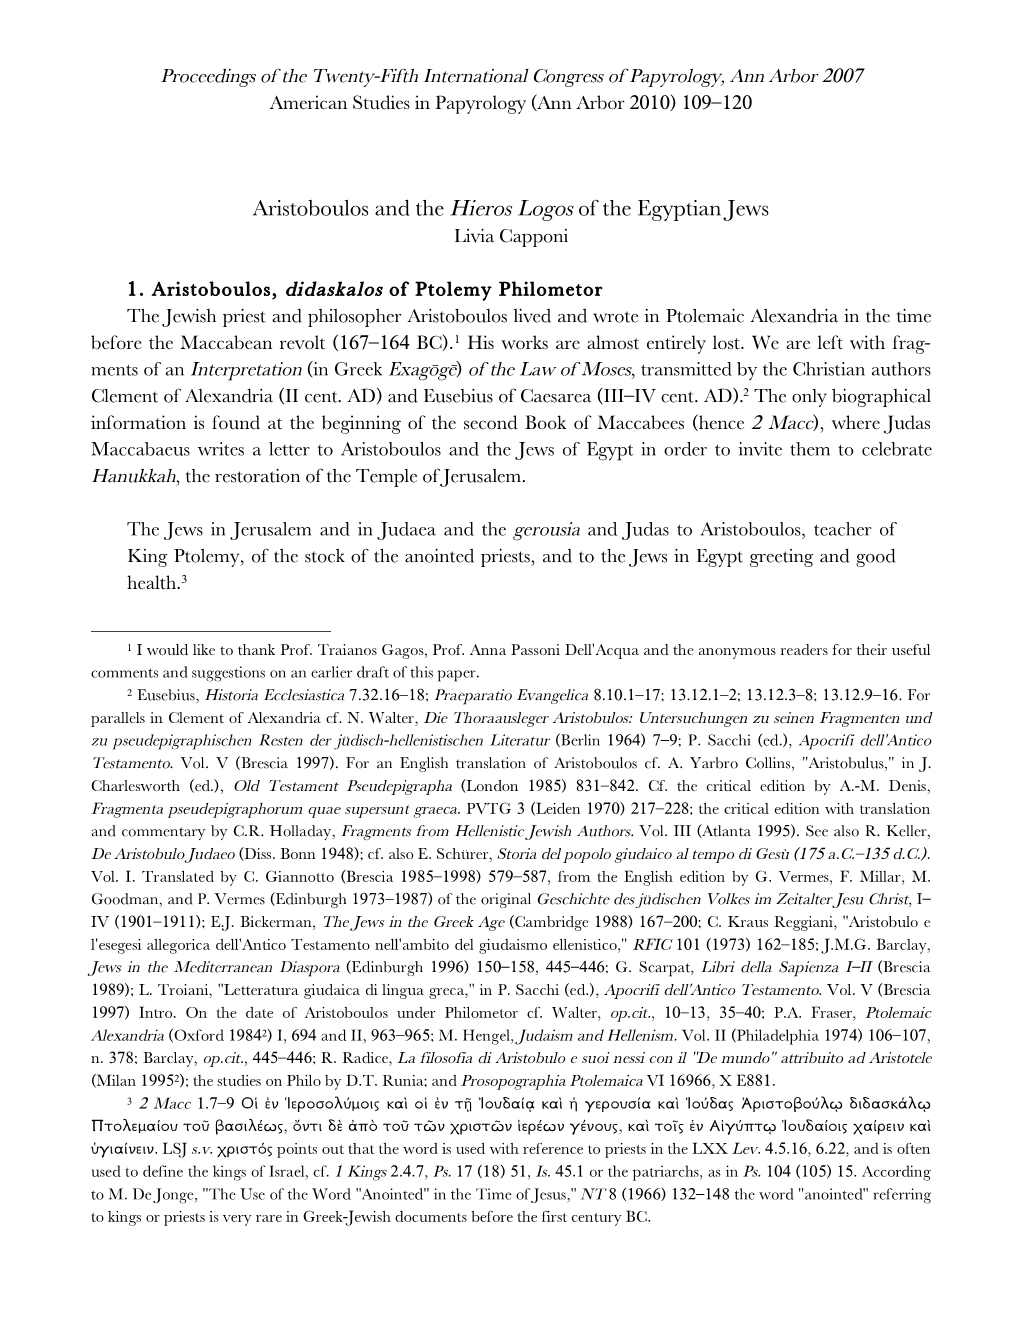 Aristoboulos and the Hieros Logos of the Egyptian Jews Livia Capponi